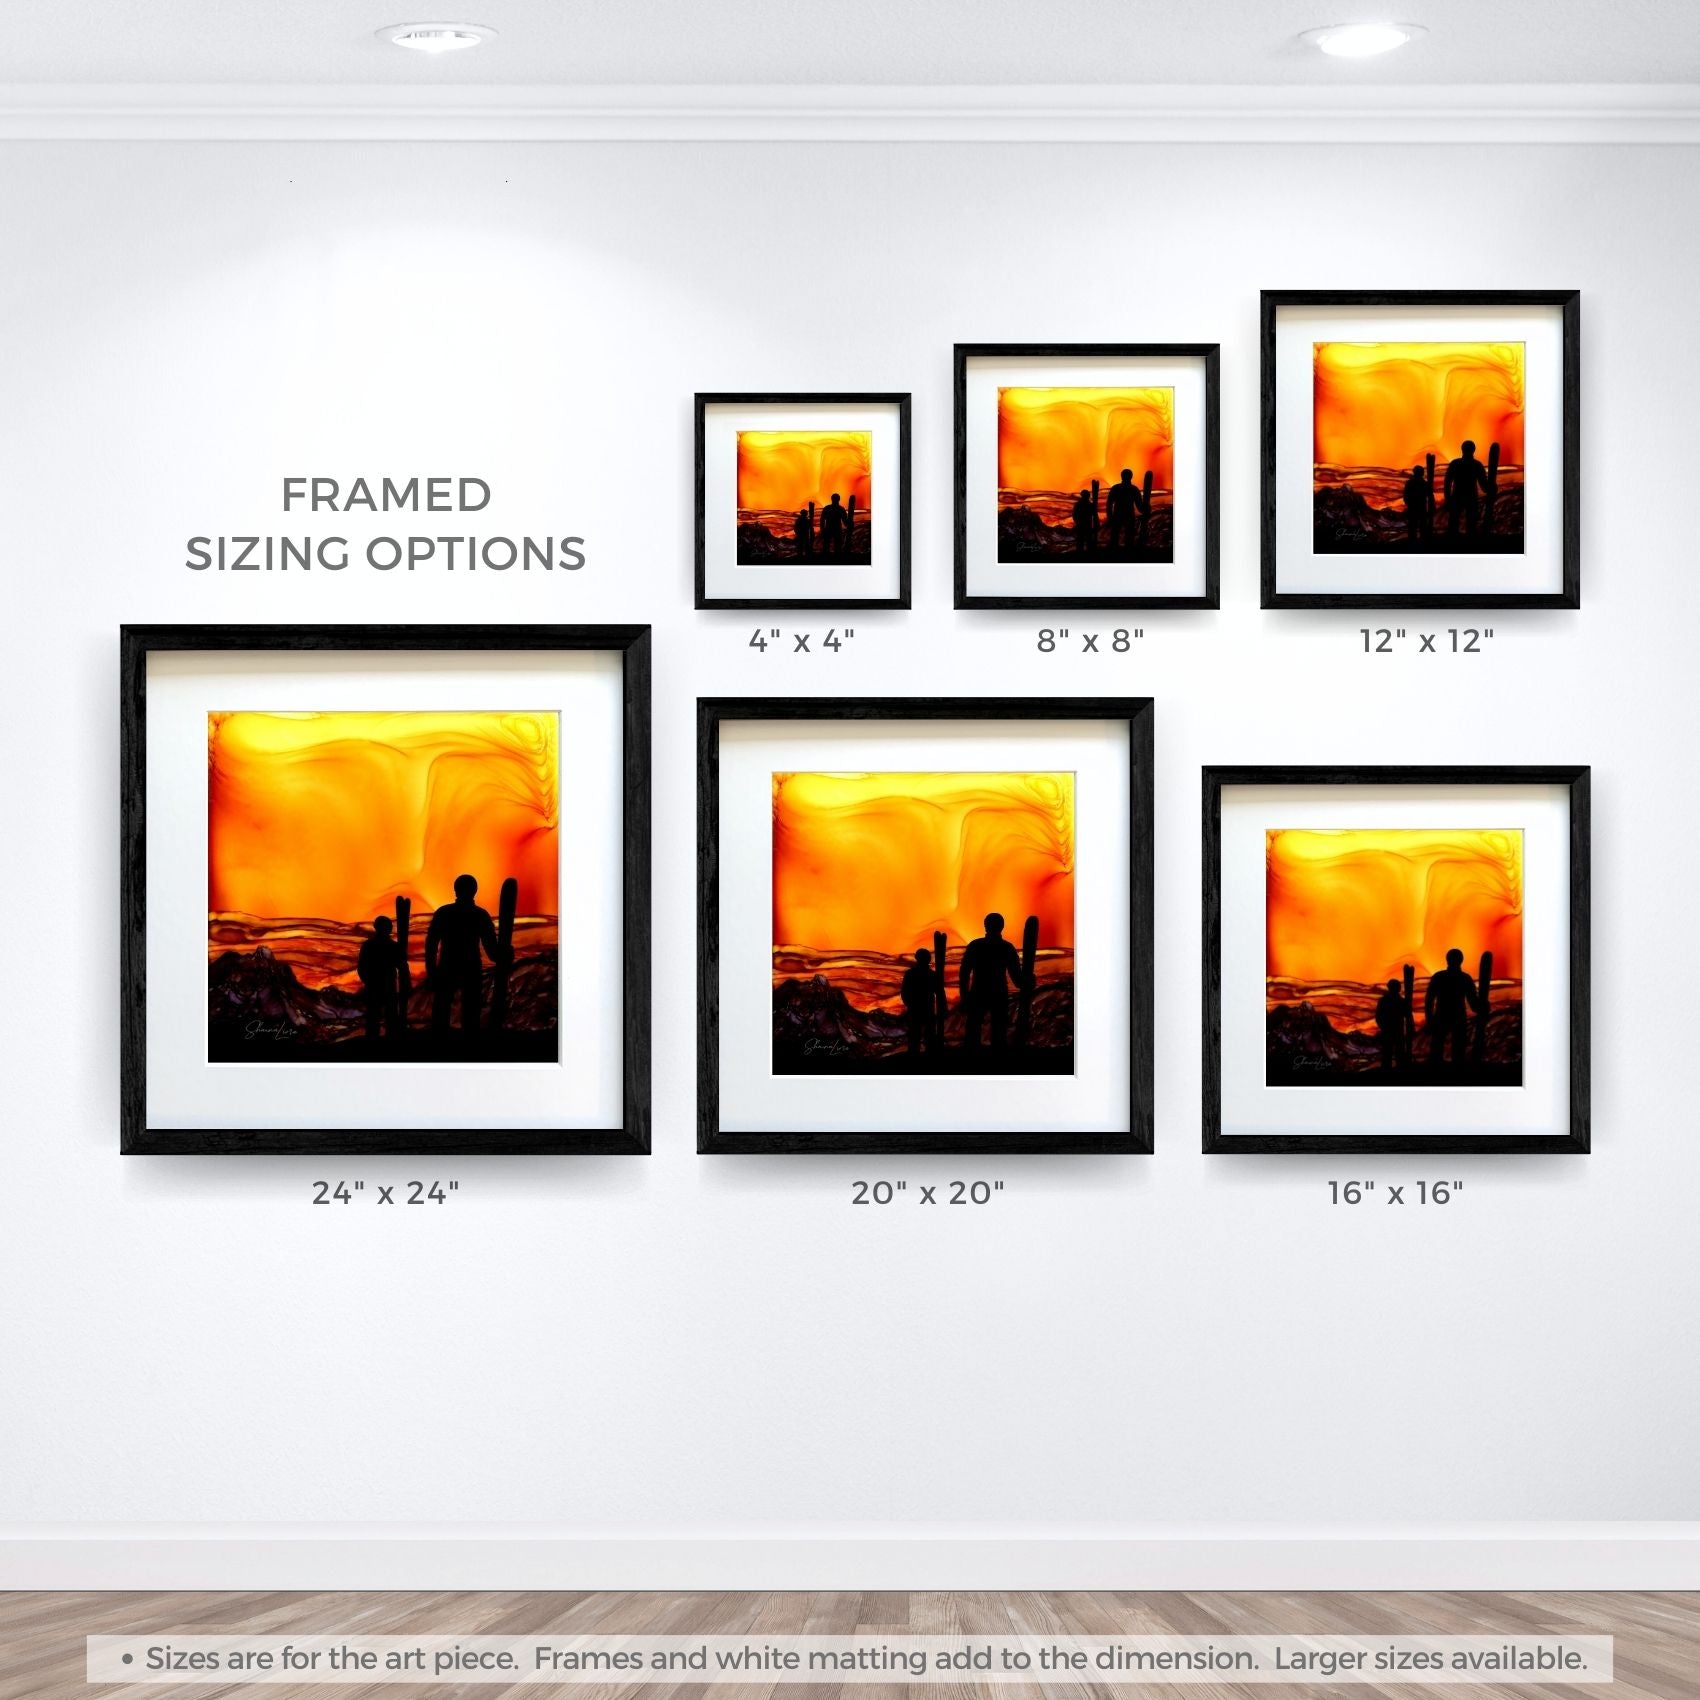 With Morning Comes Adventure - Fire Made Art Print